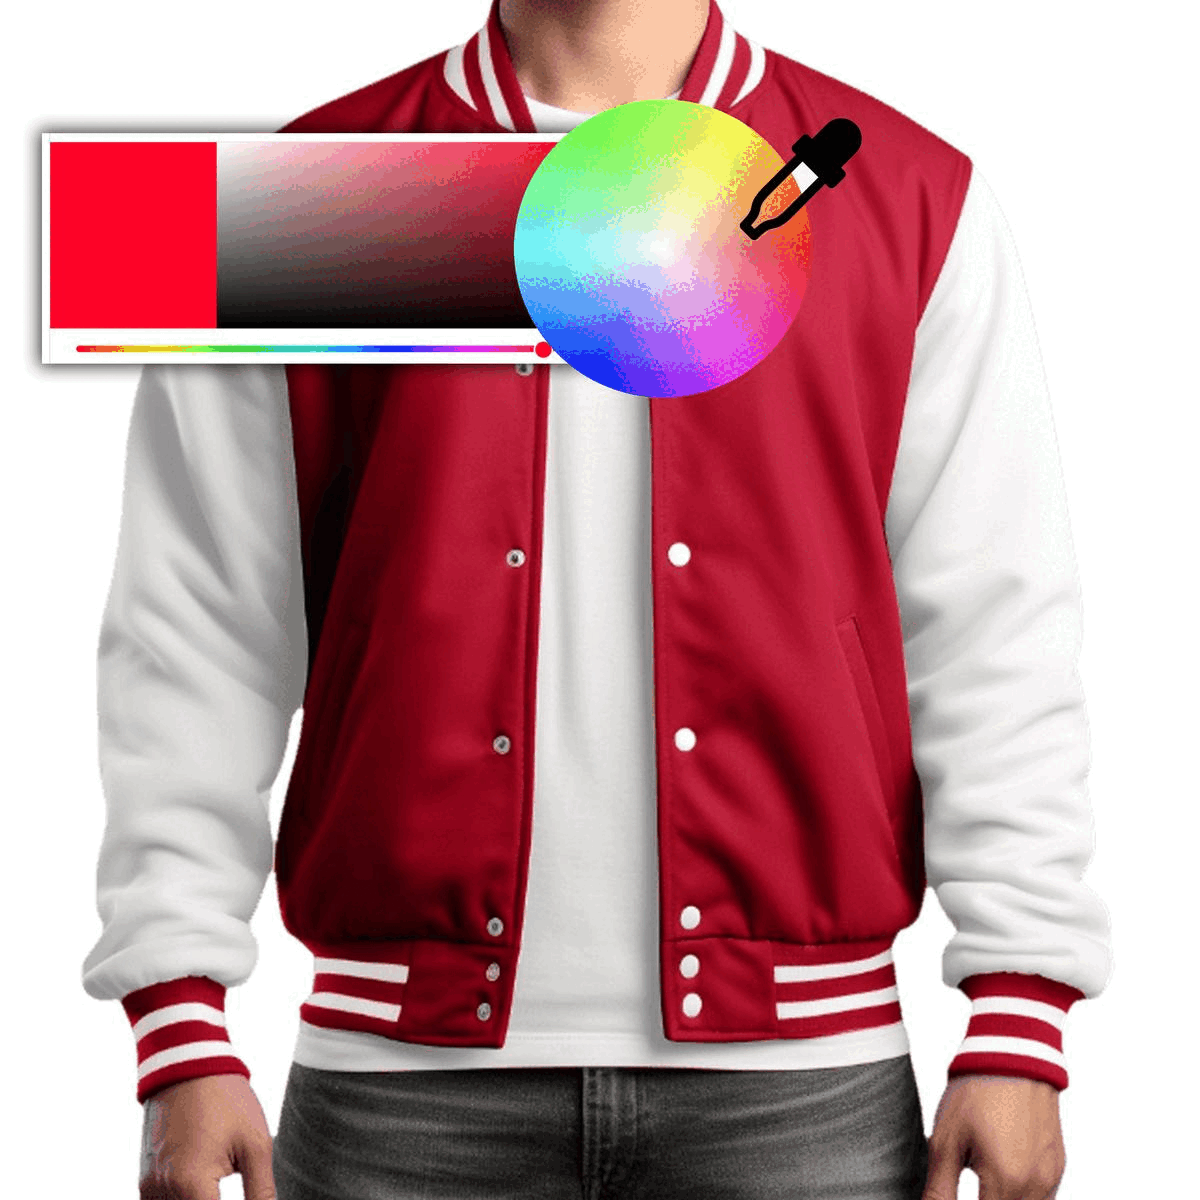 varsity jacket available in all colors